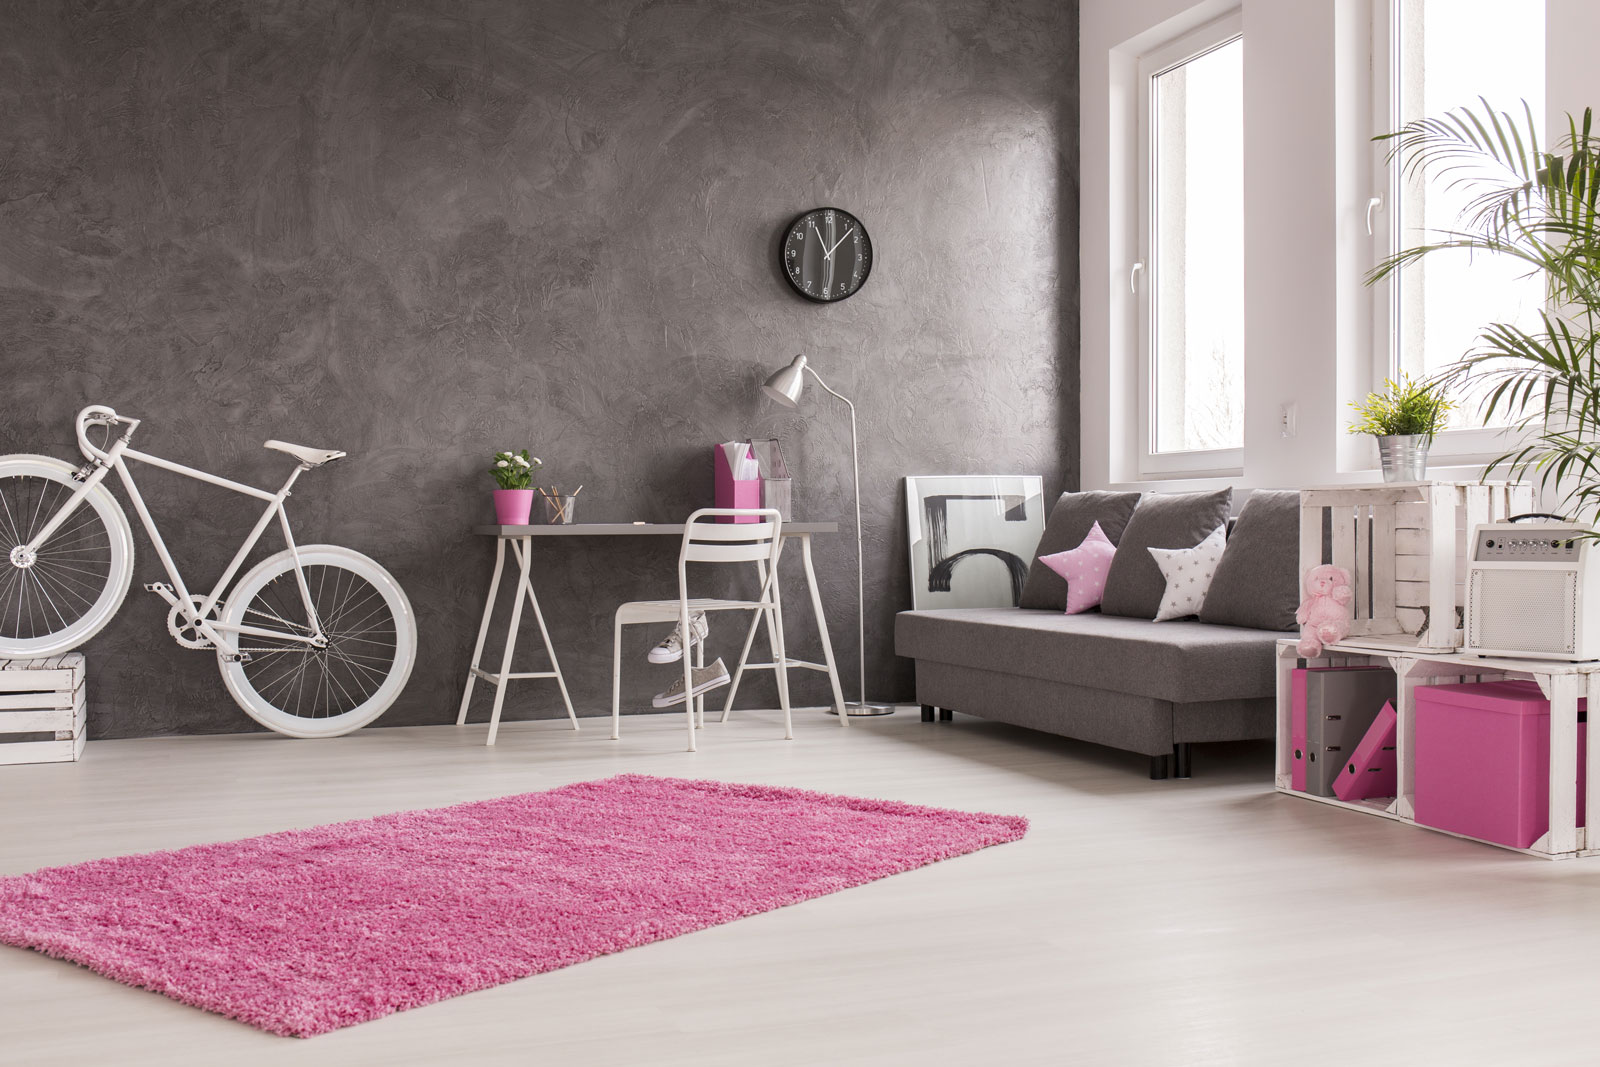 A room decorated with pink décor accessories and concrete walls - Beautiful Homes